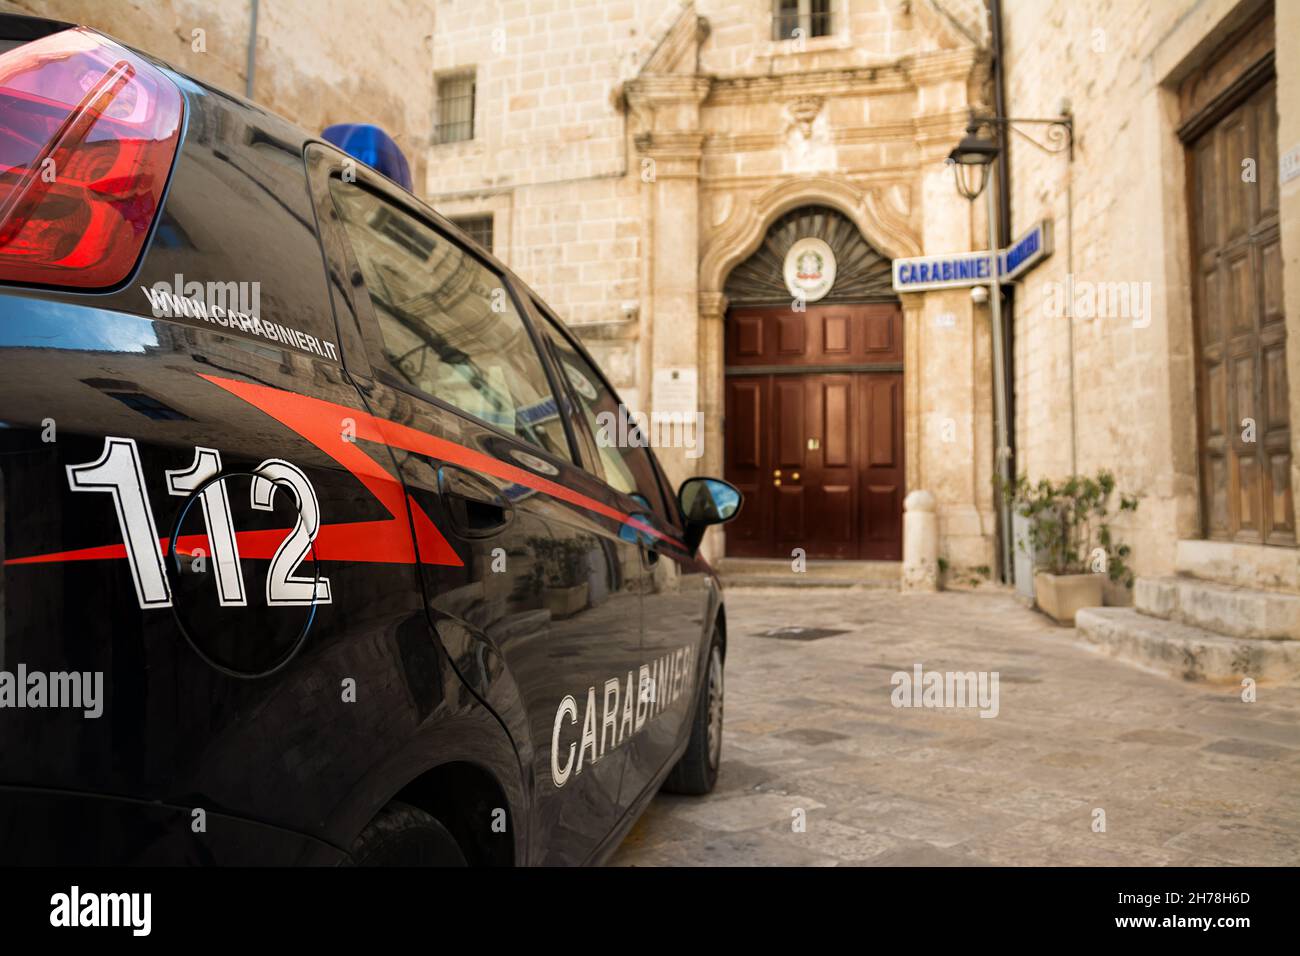 Carabinieri car with the emergency number 112 in the foreground and in the background the police station of Monopoli (Puglia-Italy) Stock Photo